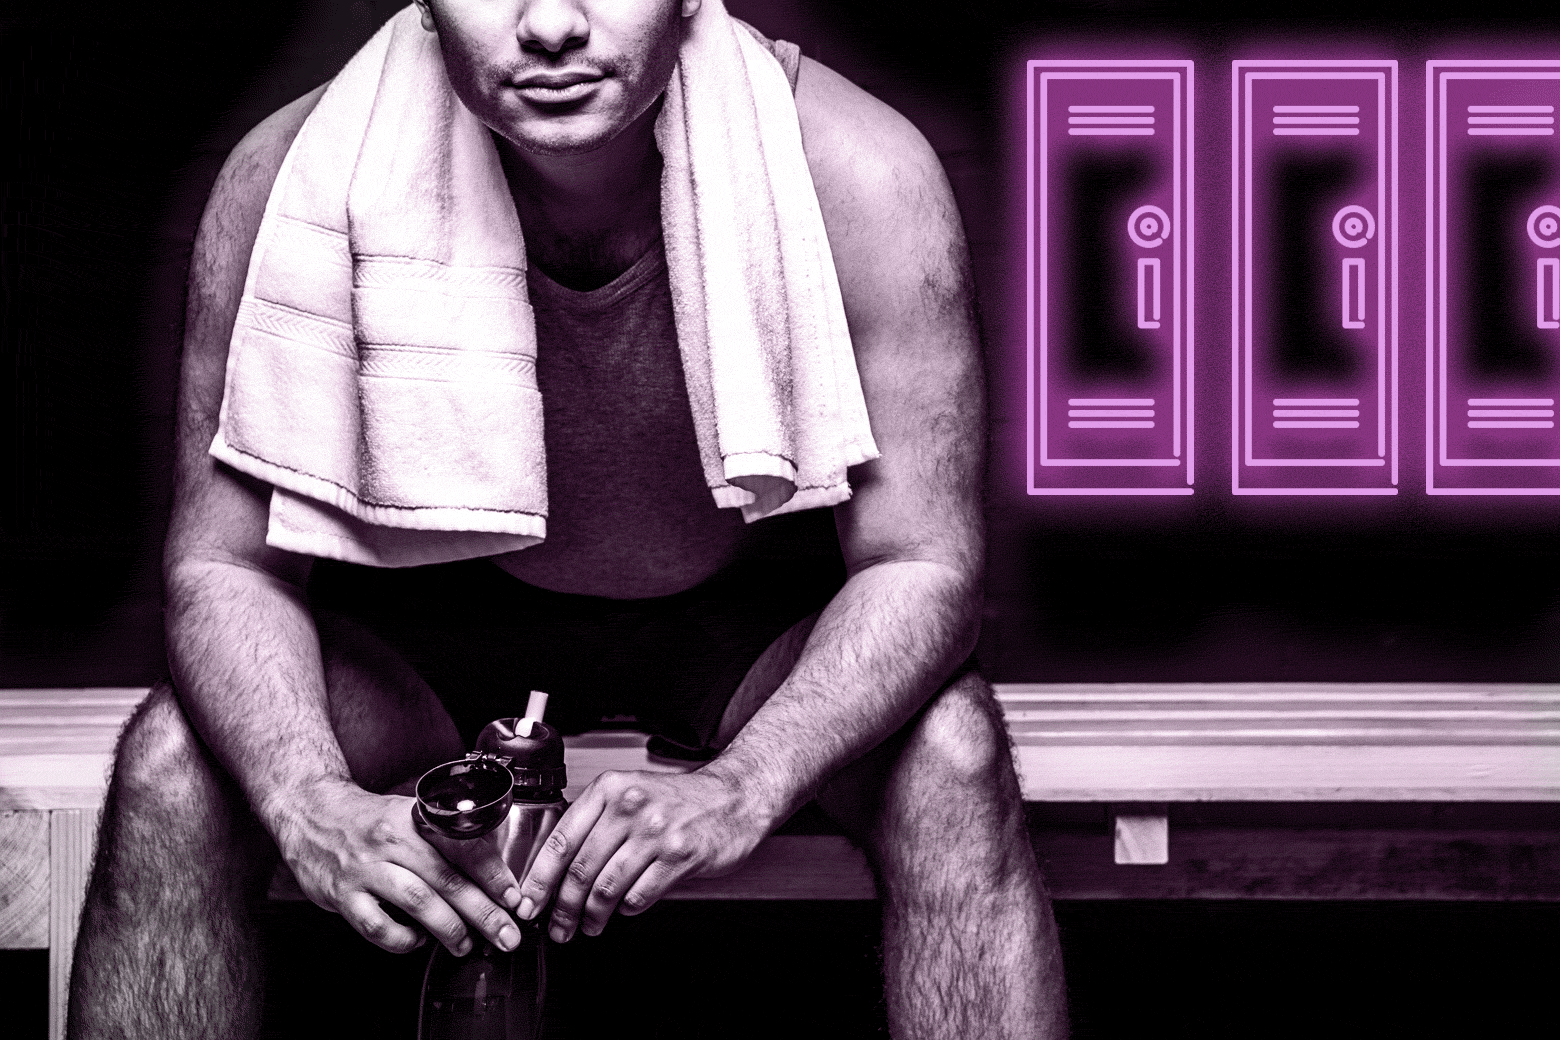 I'm a straight guy turned on by nudity in locker rooms. Is this wrong?